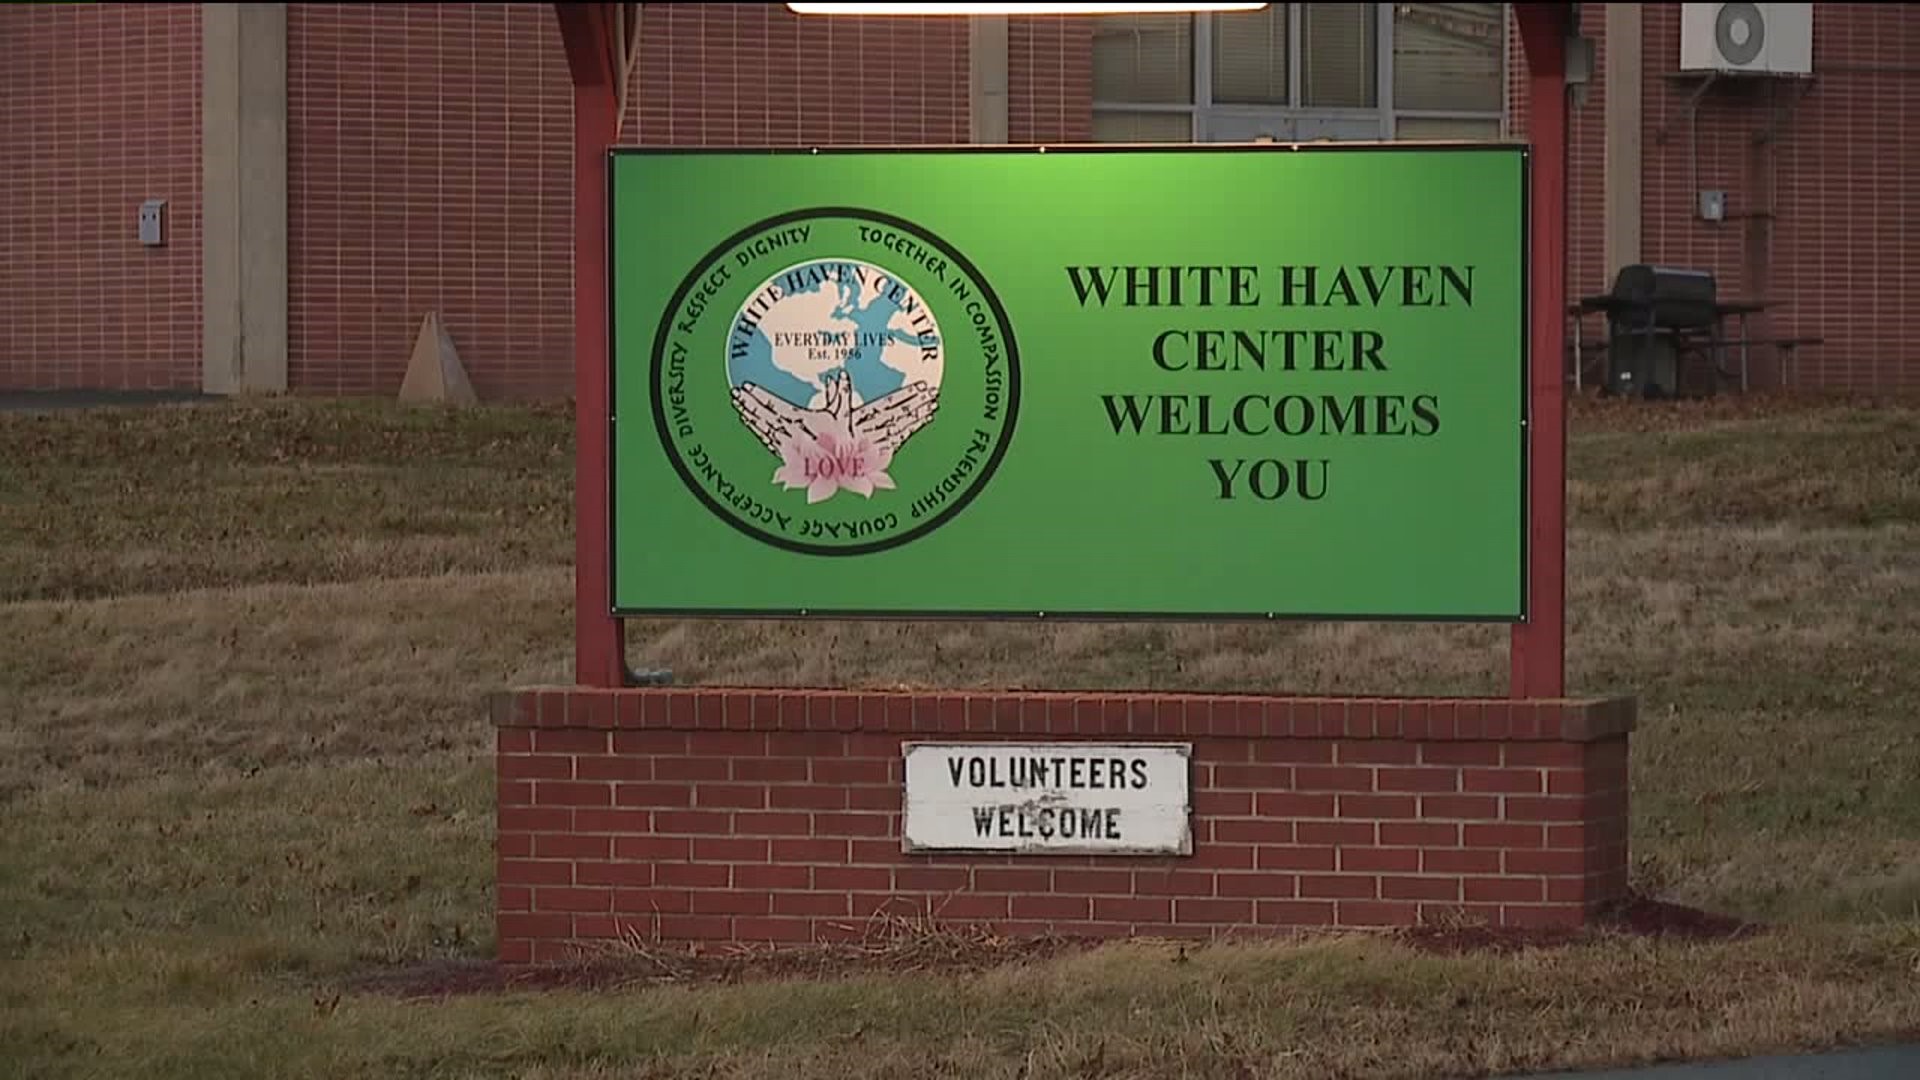 Federal Lawsuit to be Filed to Keep White Haven Center Open